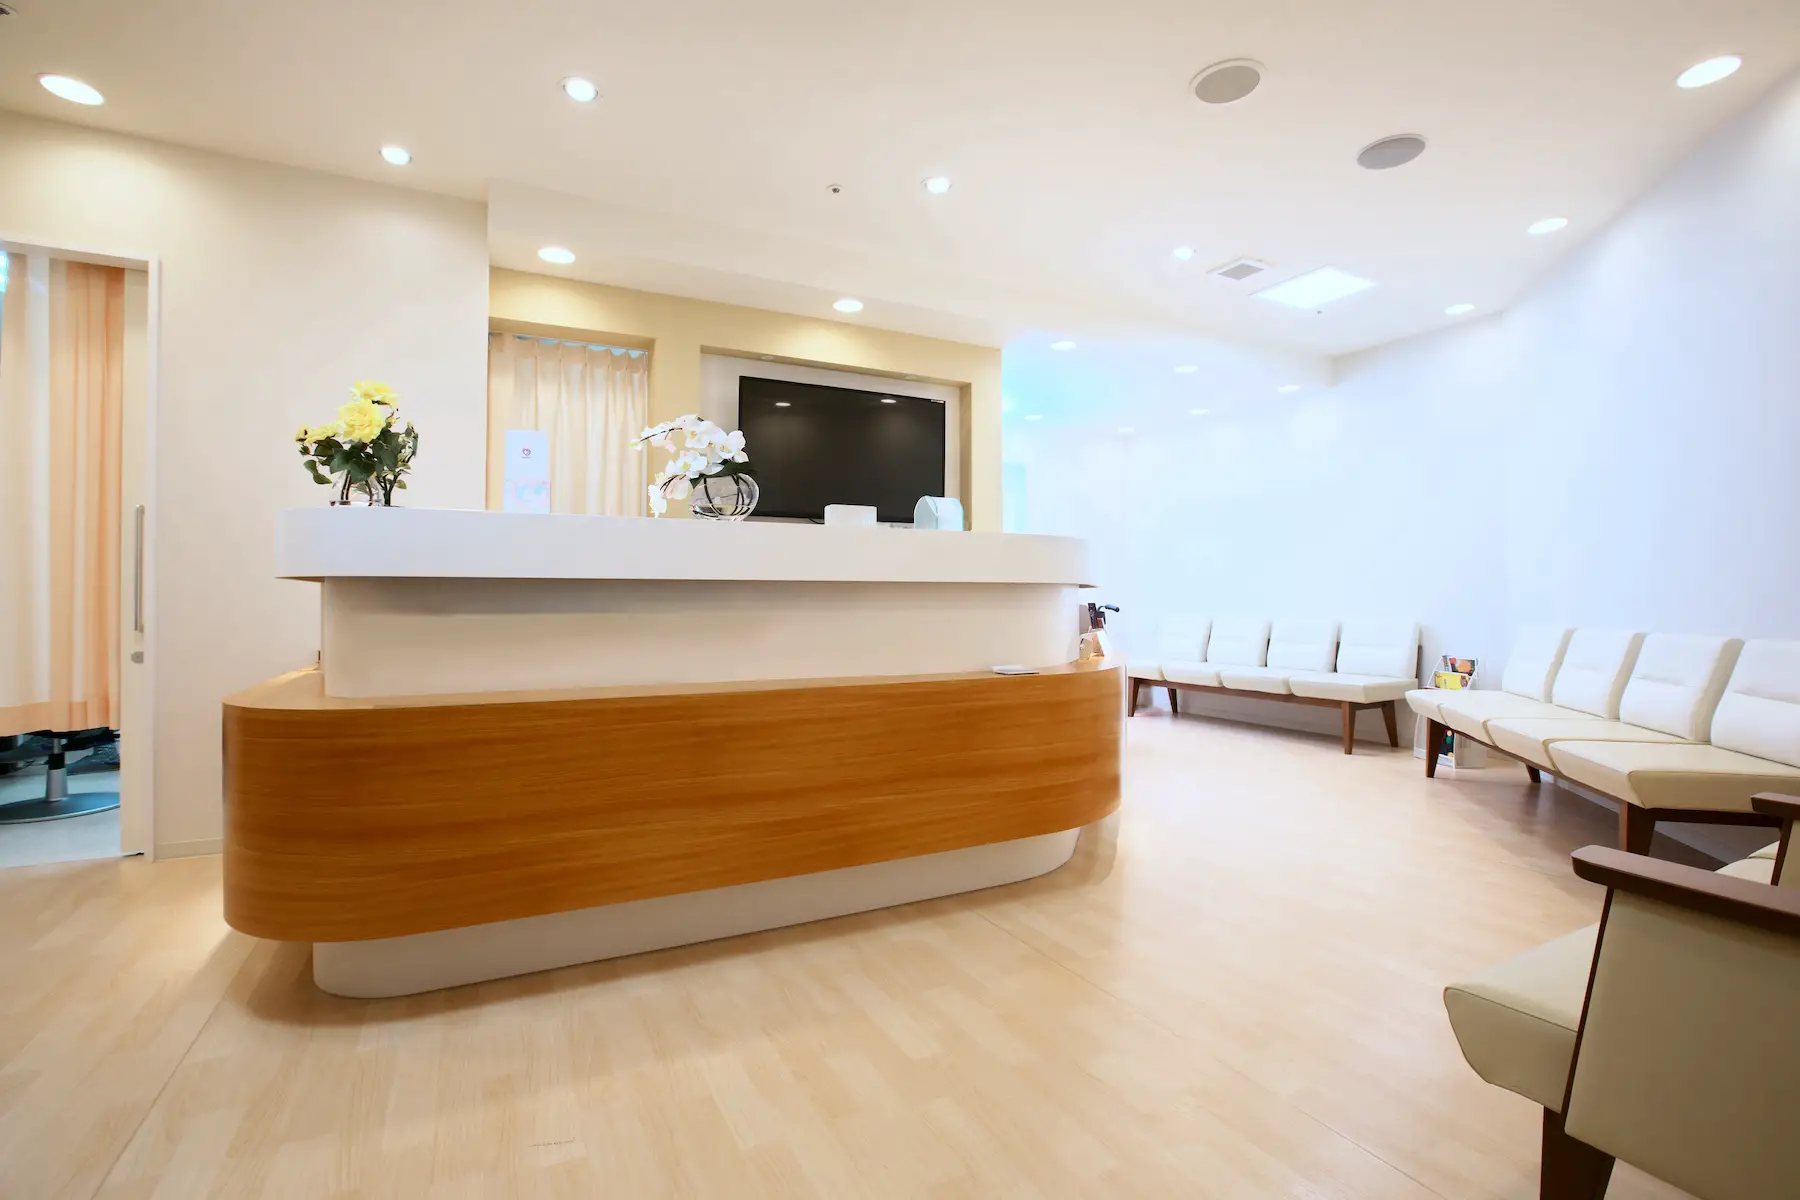 The bright, empty waiting room of a Japanese medical clinic or hospital, with flowers on the reception desk